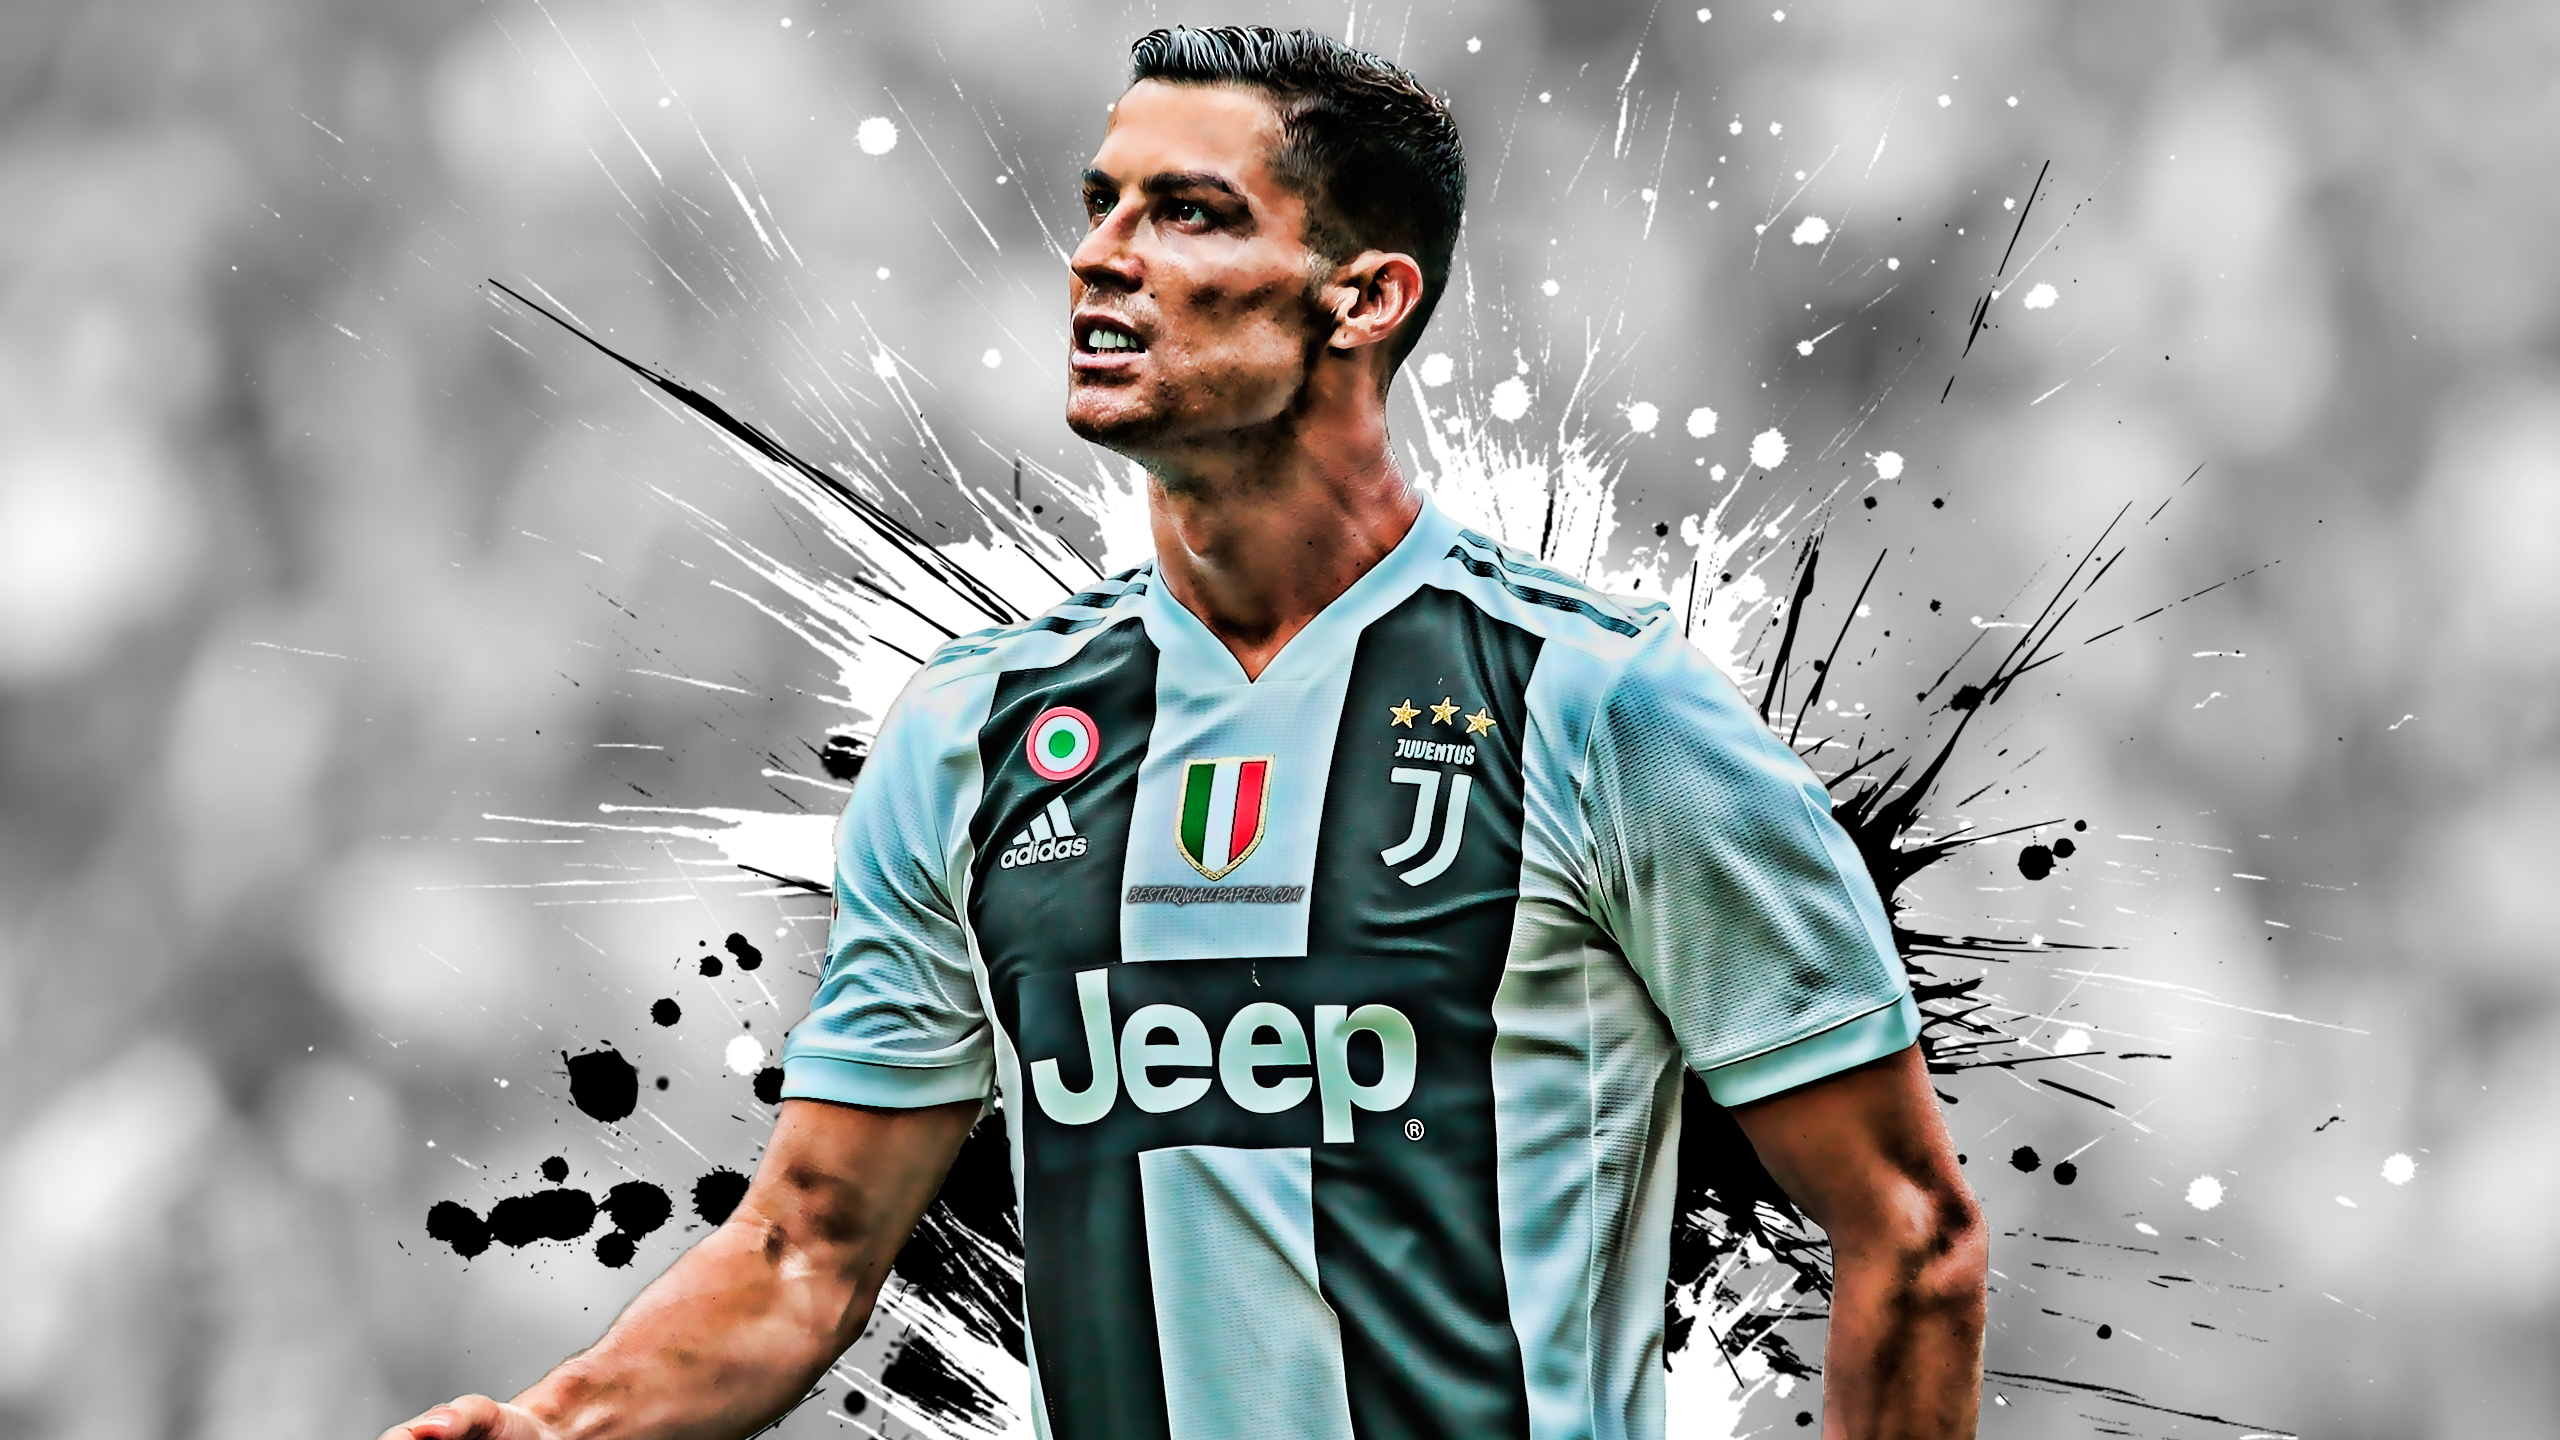 Cr7 Juventus Wallpaper Hd 2020 / Juventus Wallpaper HD | 2020 Cute Wallpapers / Great images of cr7 juventus for your custom browser!